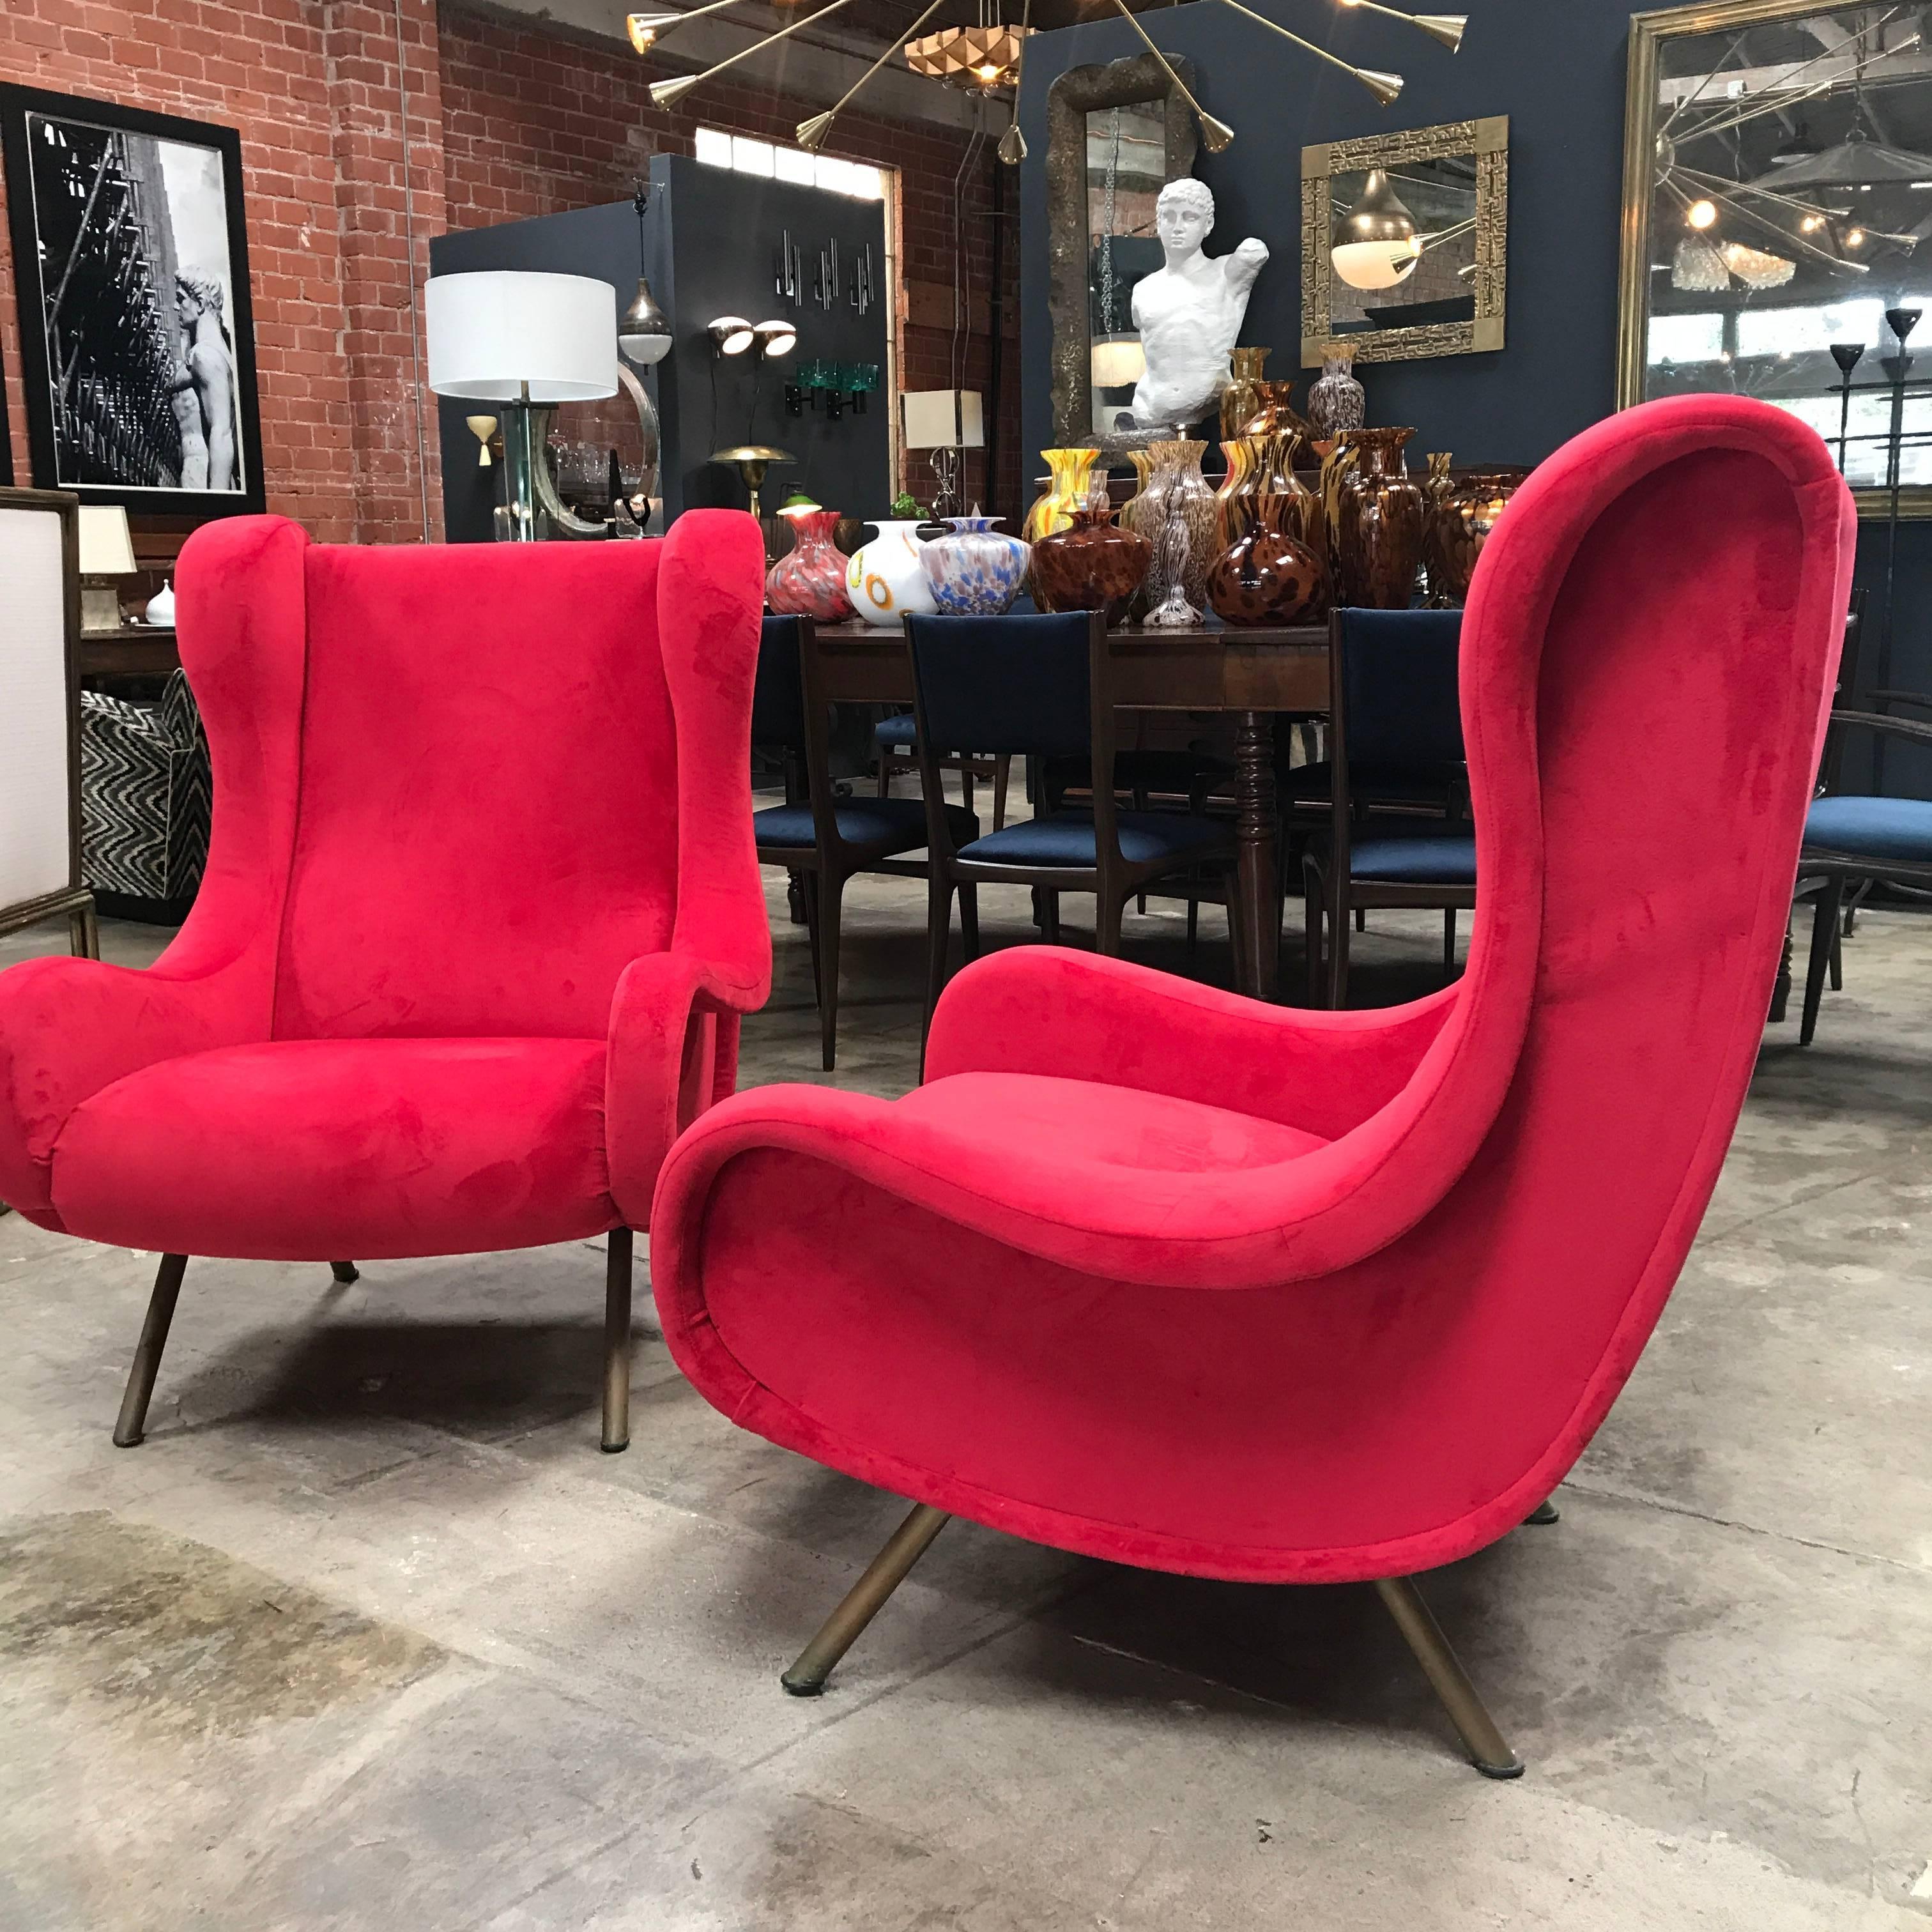 Marco Zanuso Senior Armchairs 1950-1960 for Arflex In Excellent Condition For Sale In Los Angeles, CA